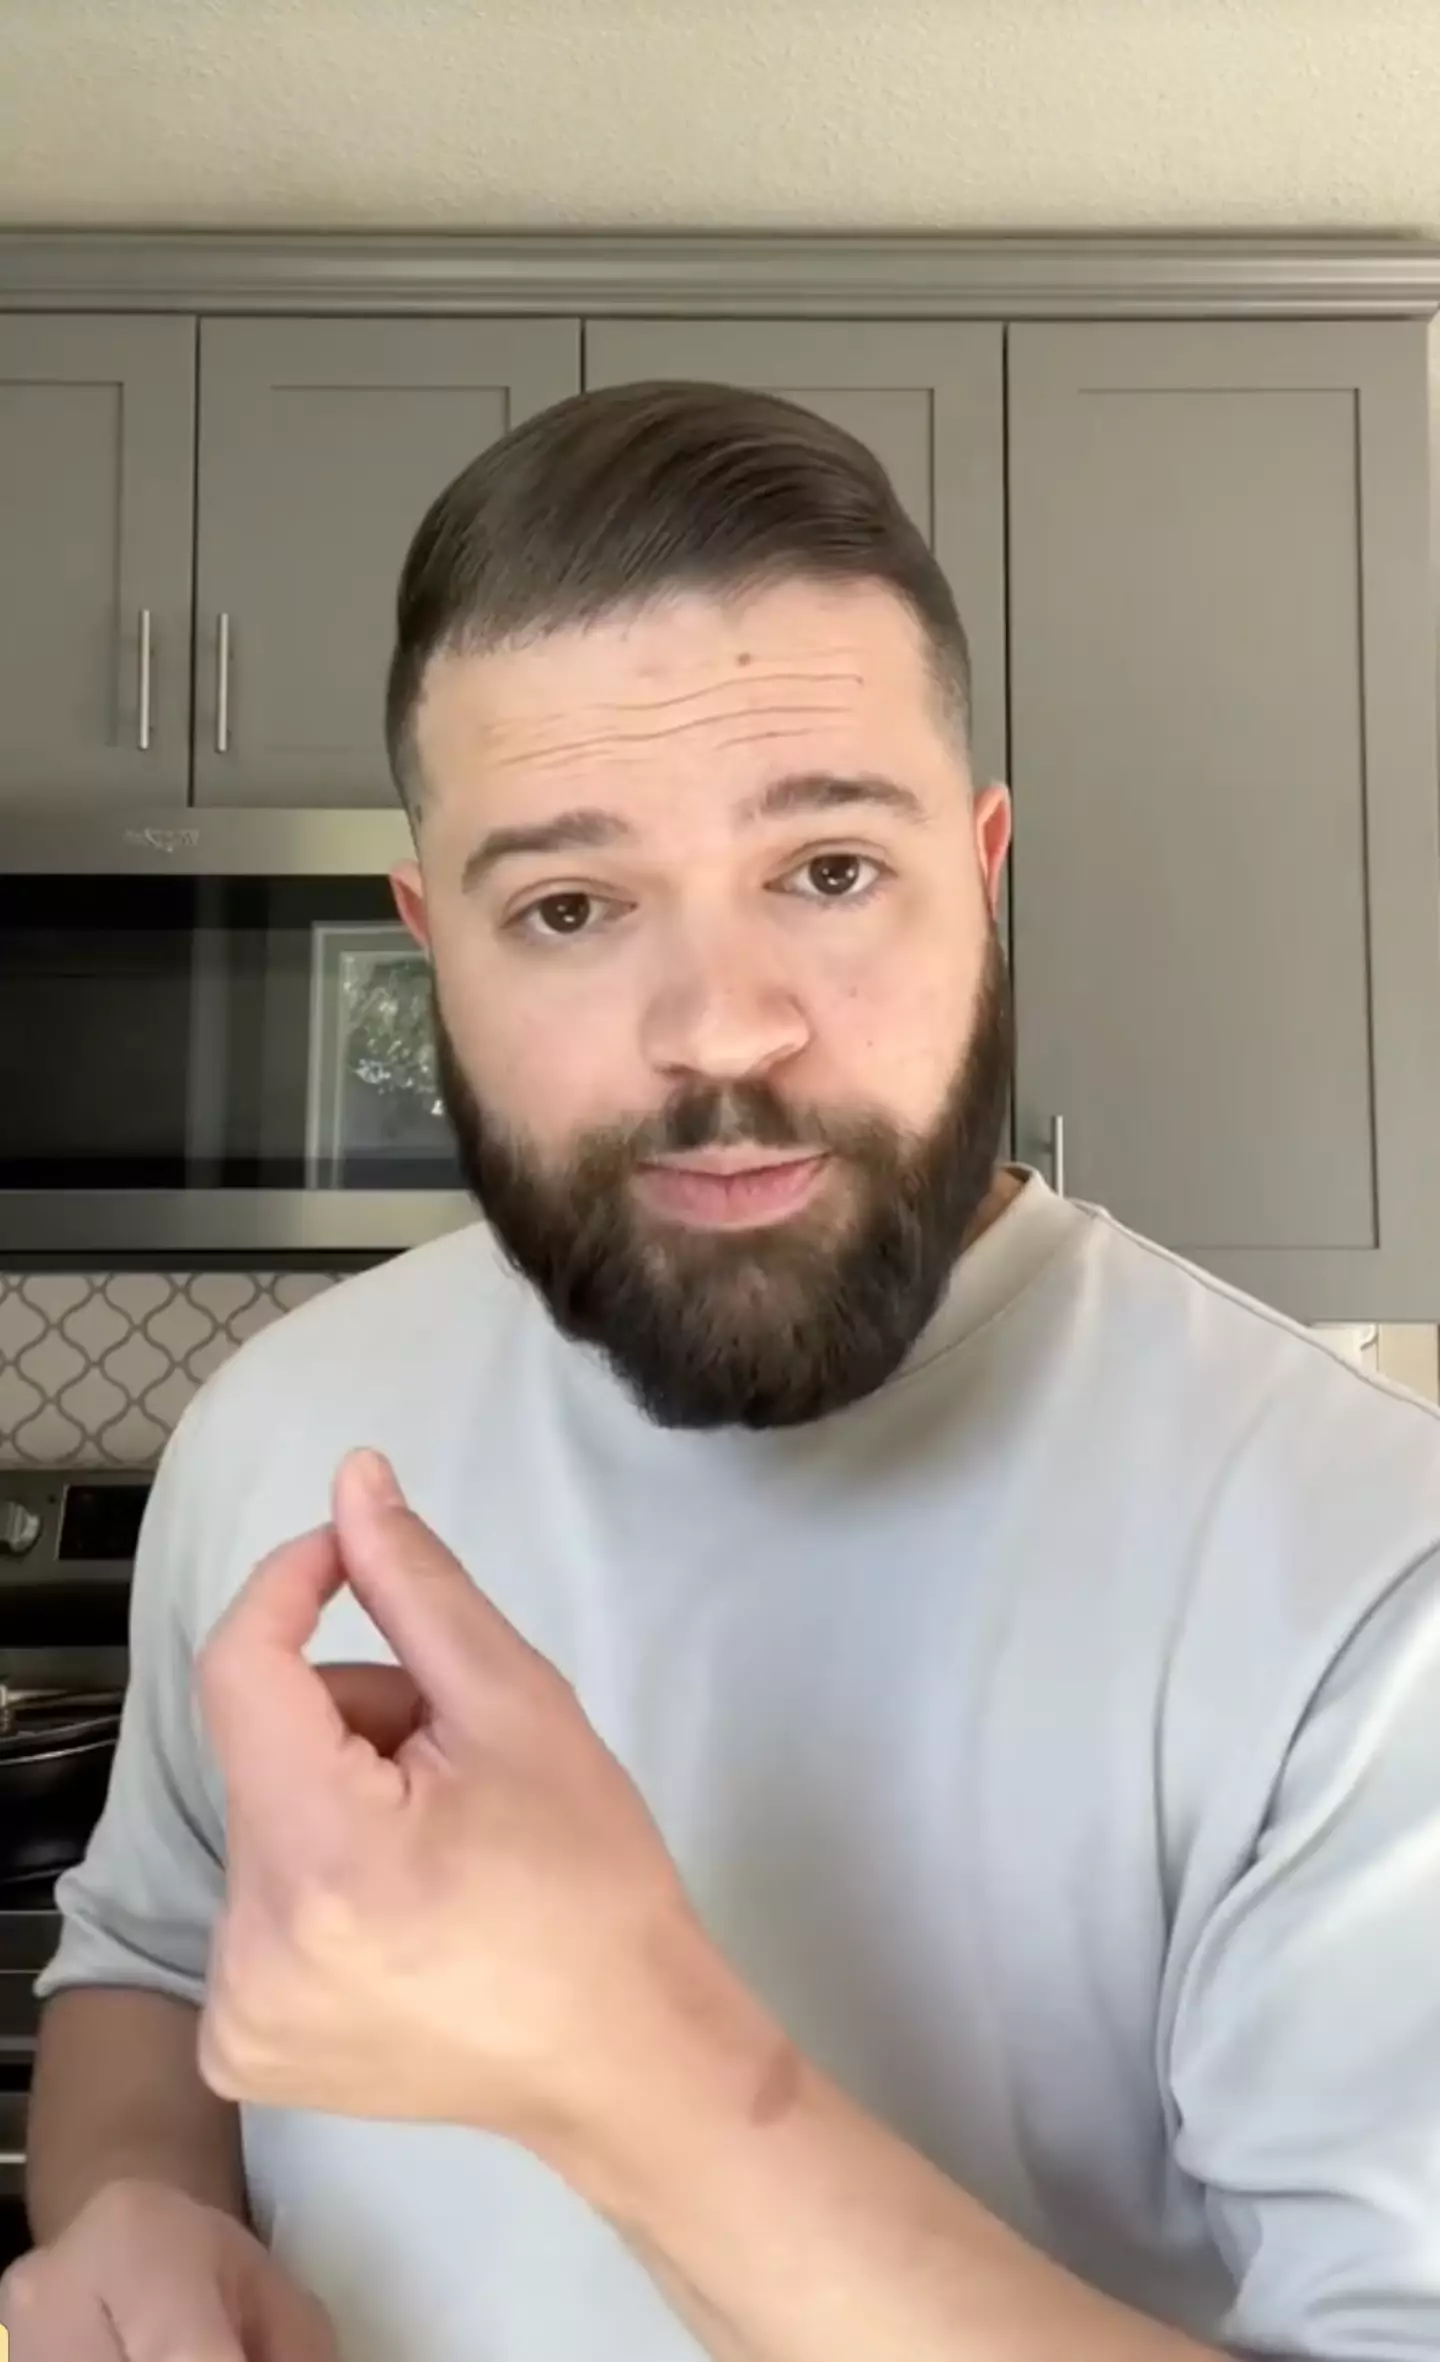 The social media star revealed what happened when a woman tried to eat his nutmeg. (TikTok/@driftersjoint)